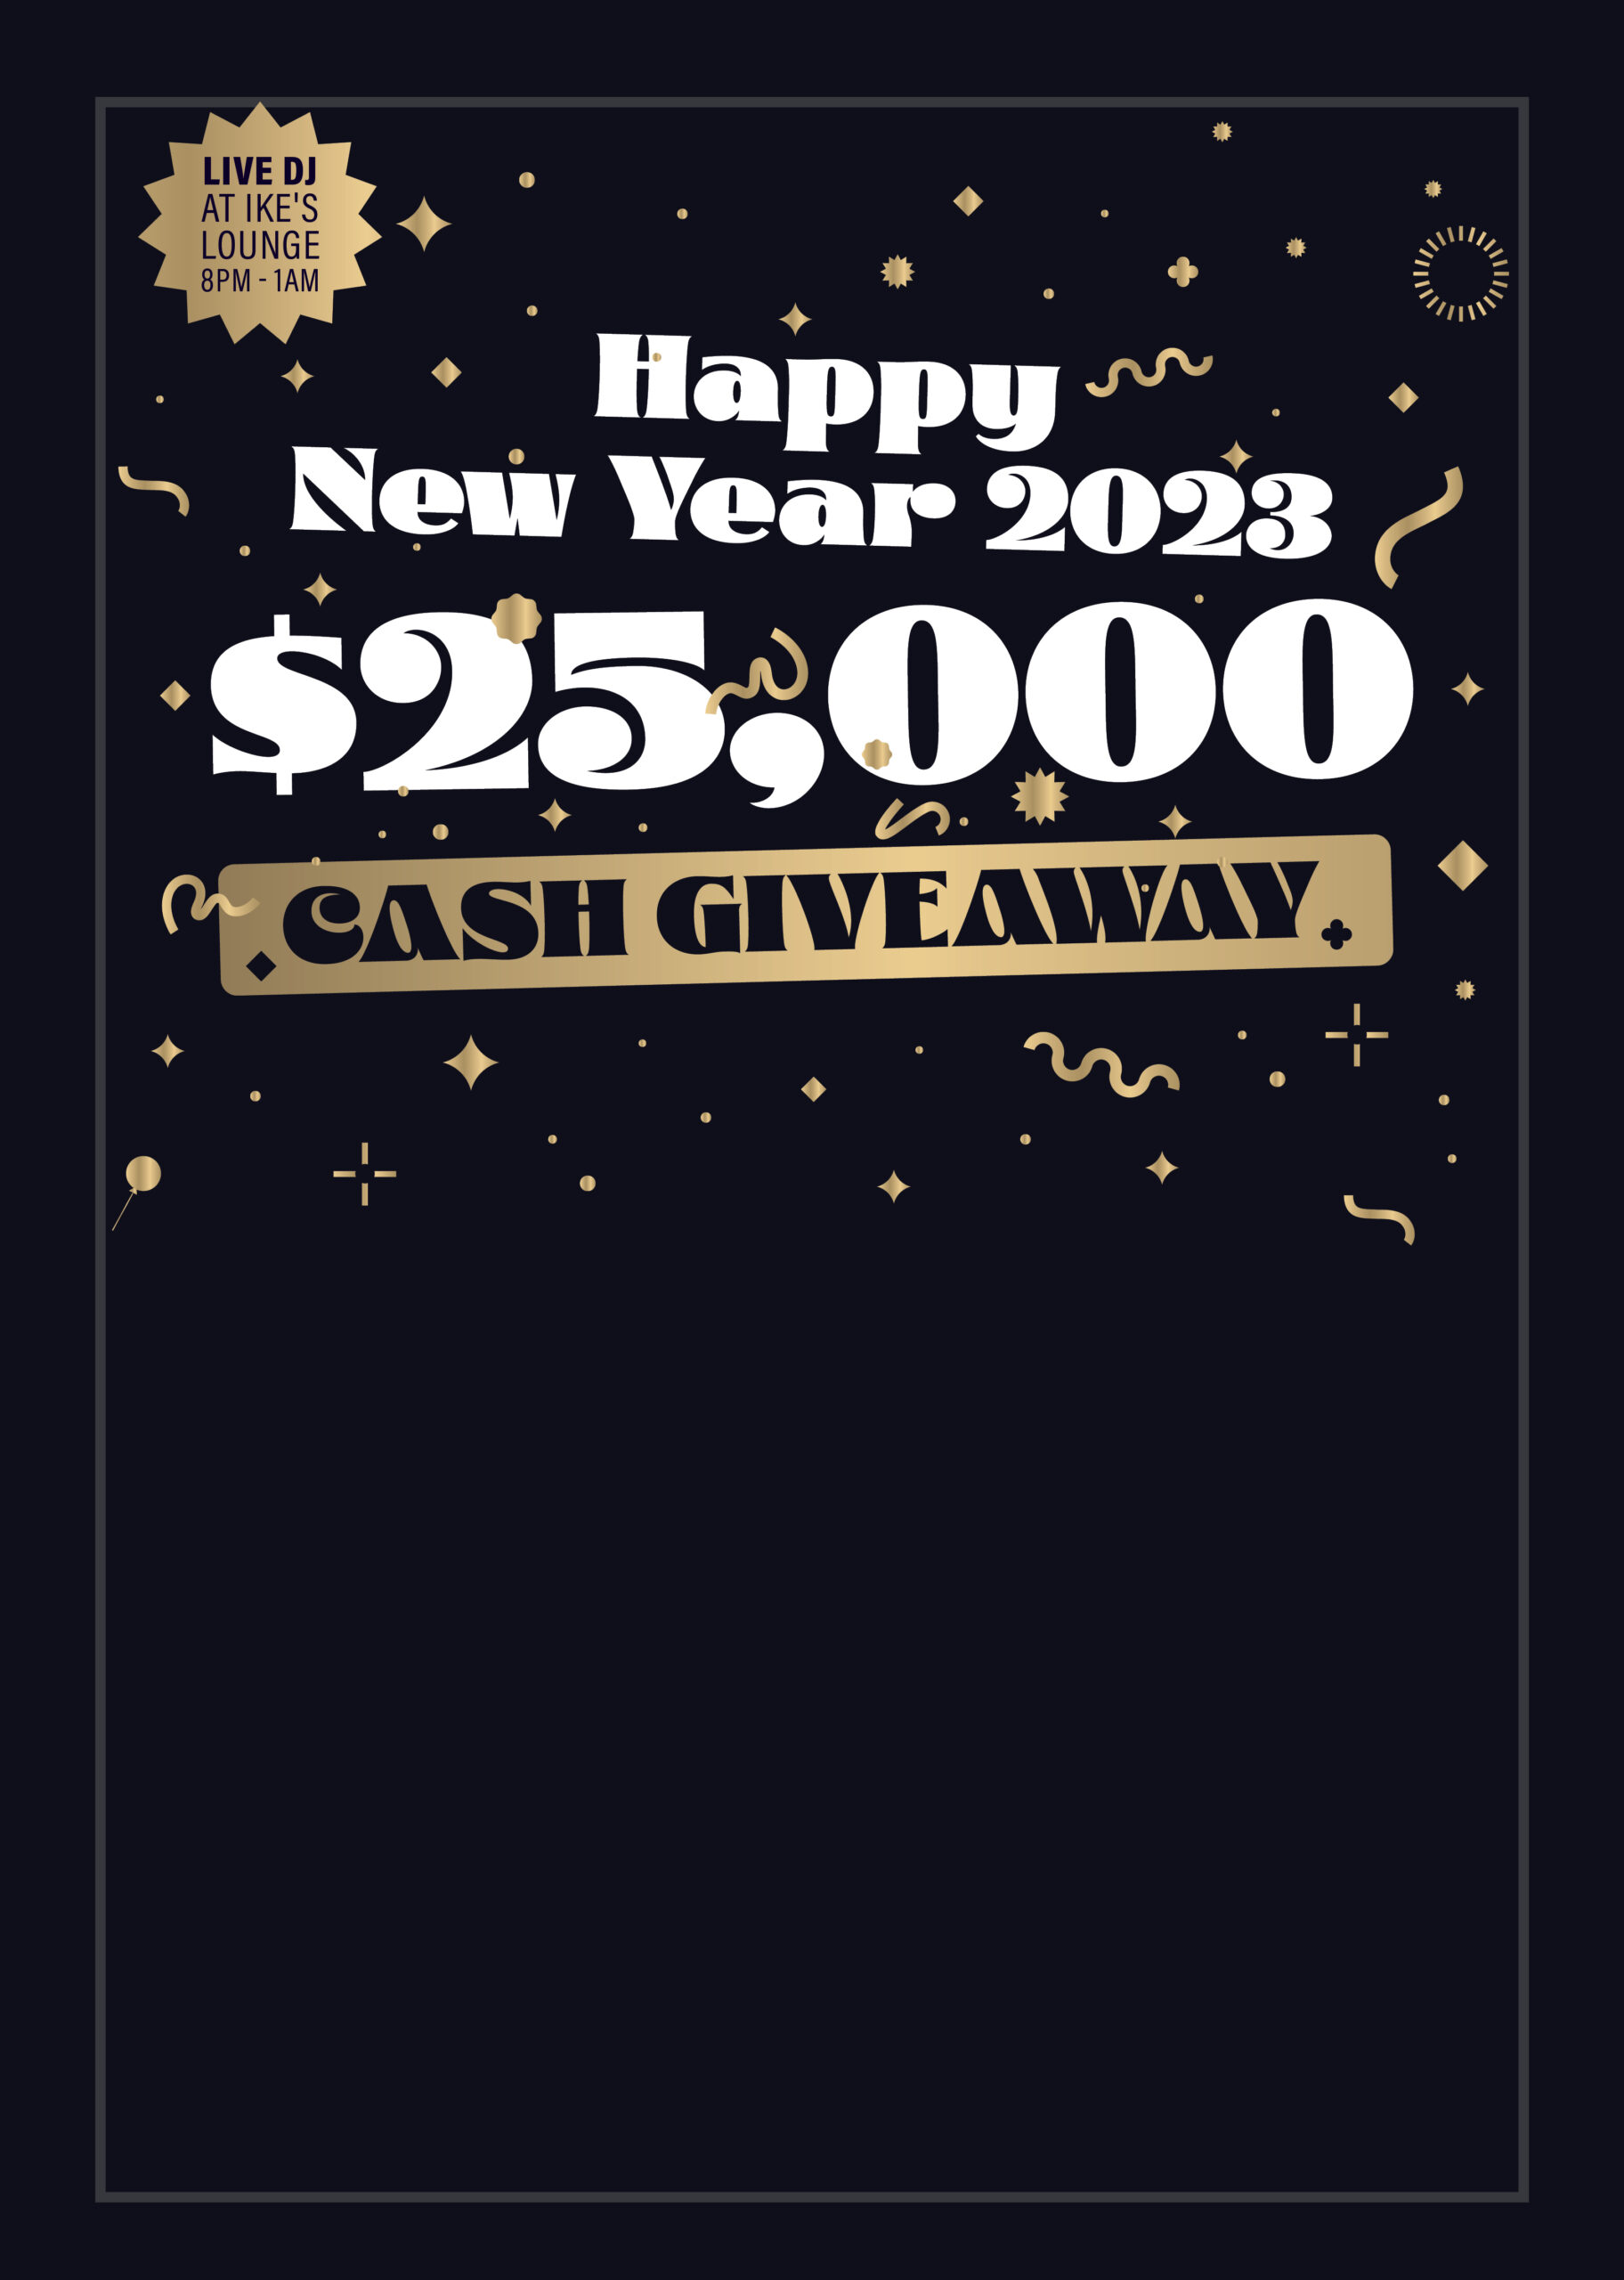 New Years Cash Giveaway